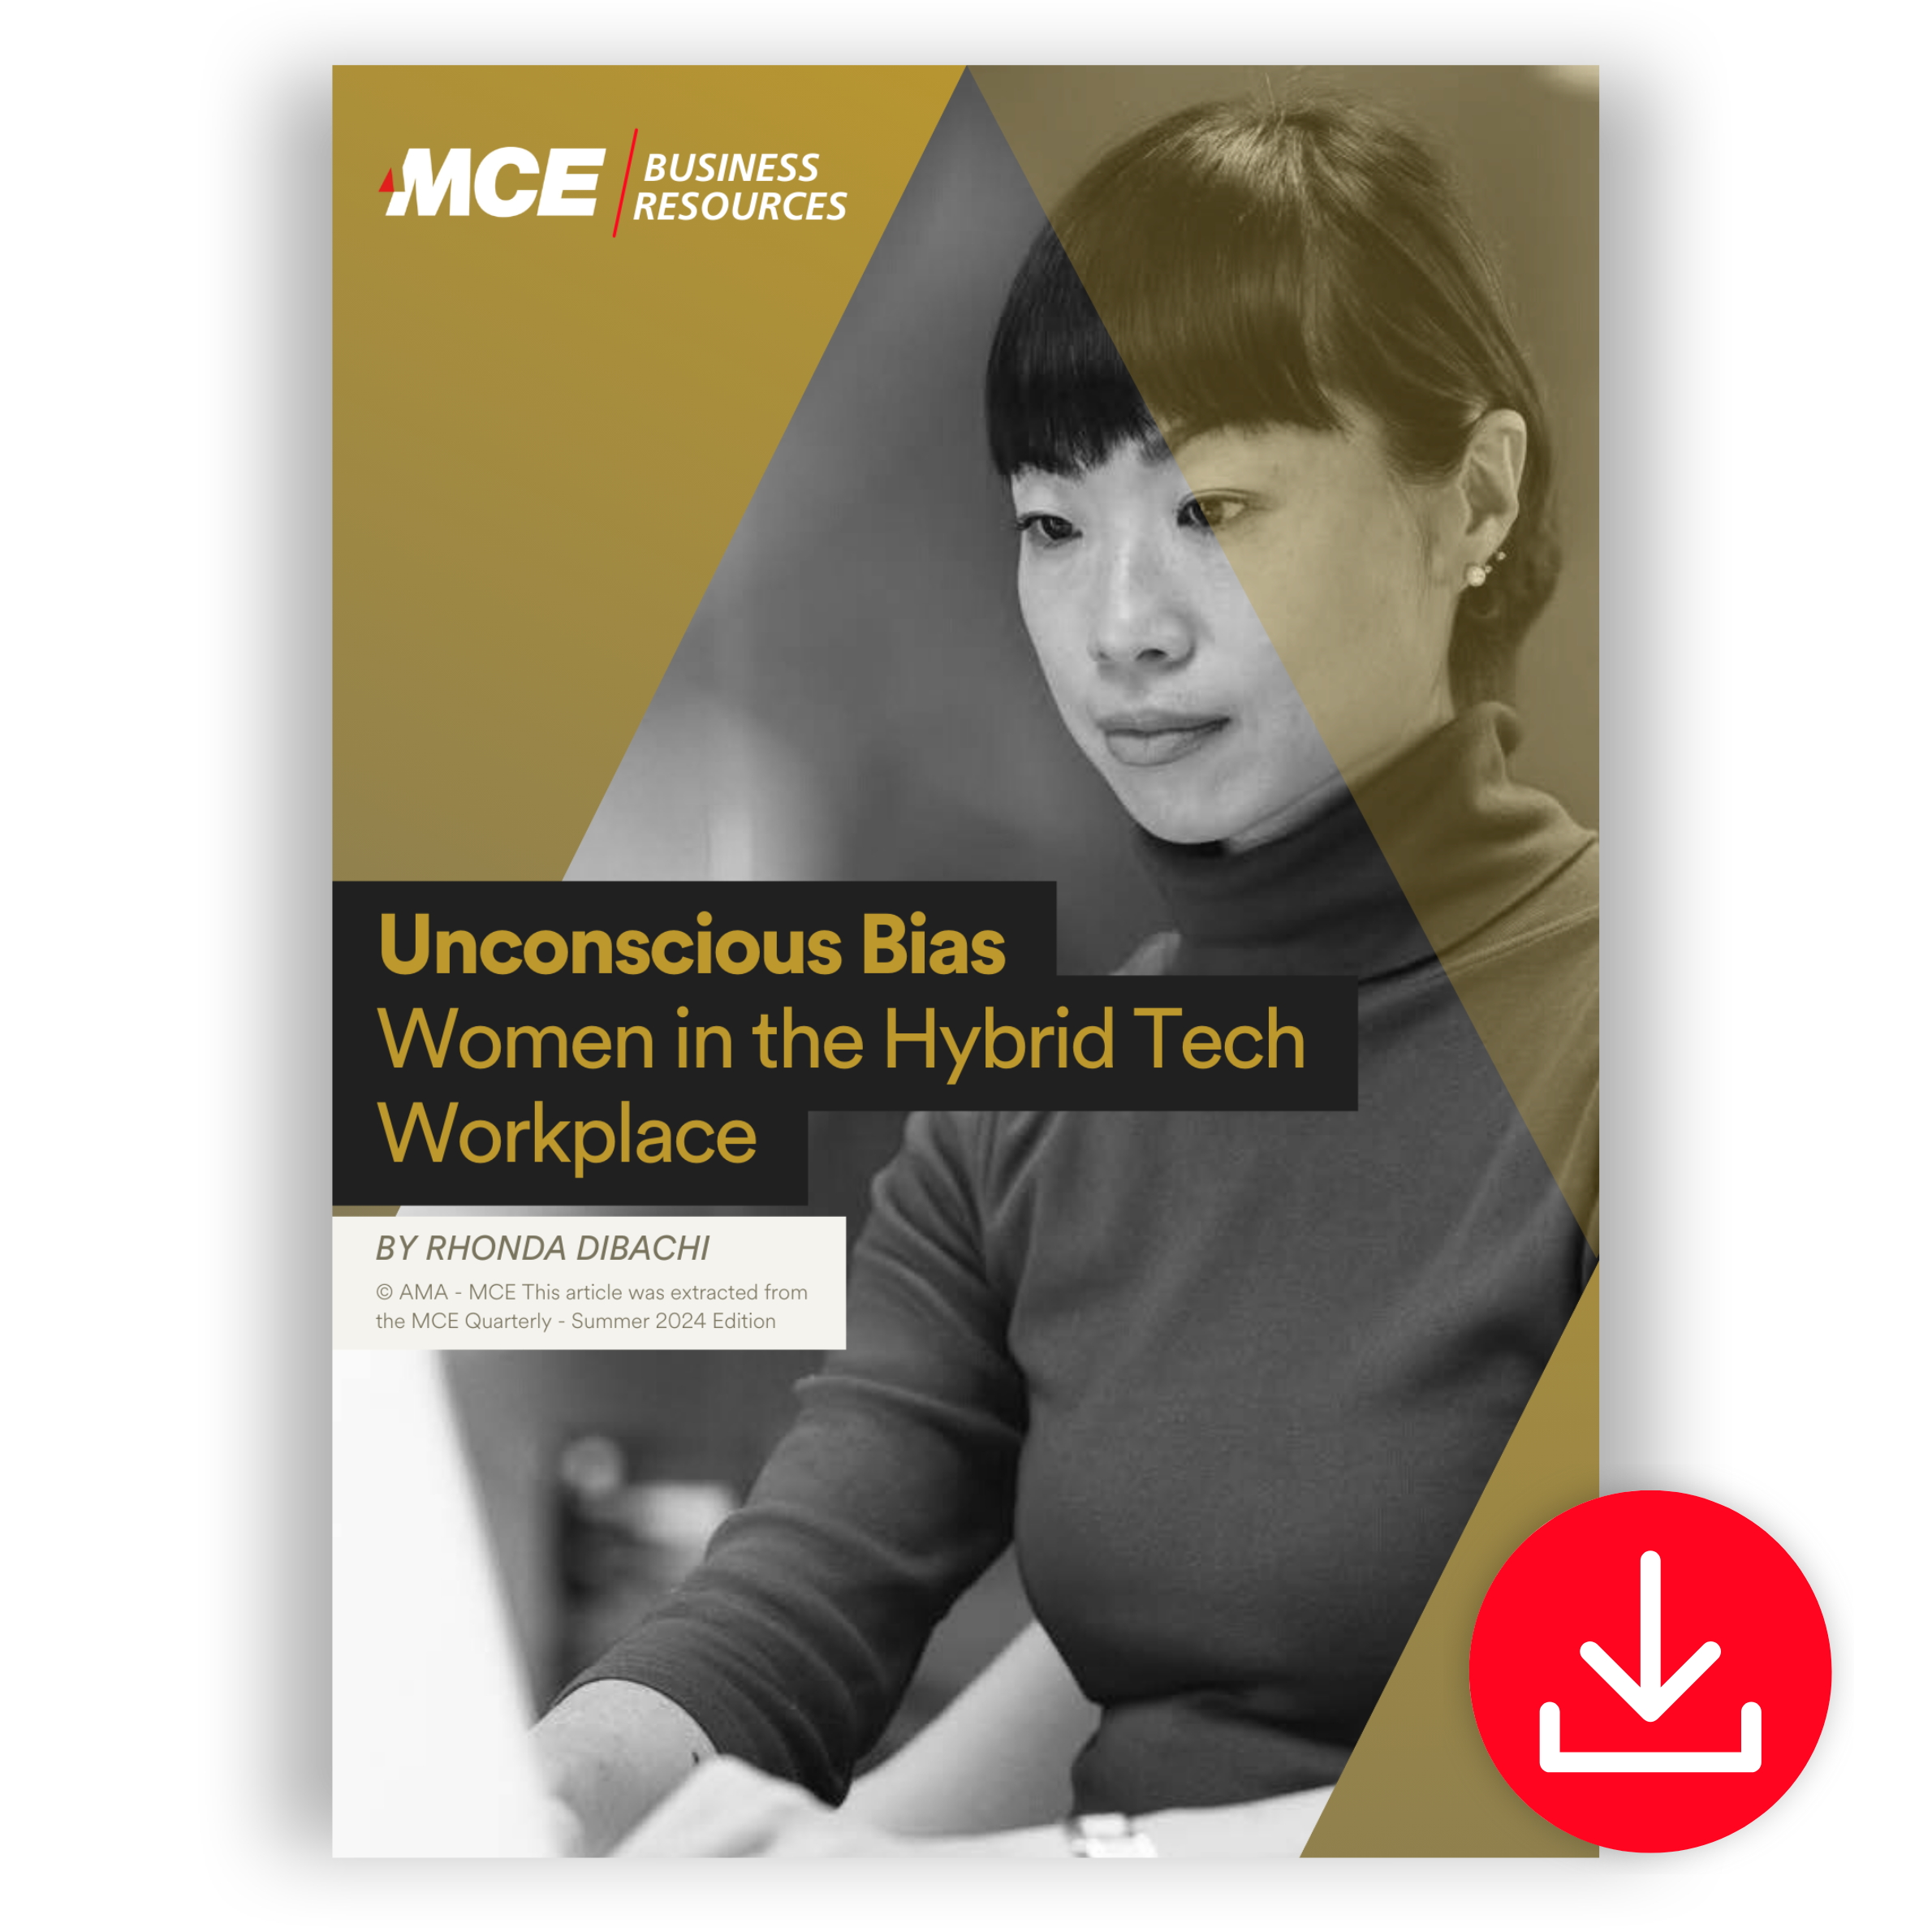 Unconscious Bias—Women in the Hybrid Tech Workplace